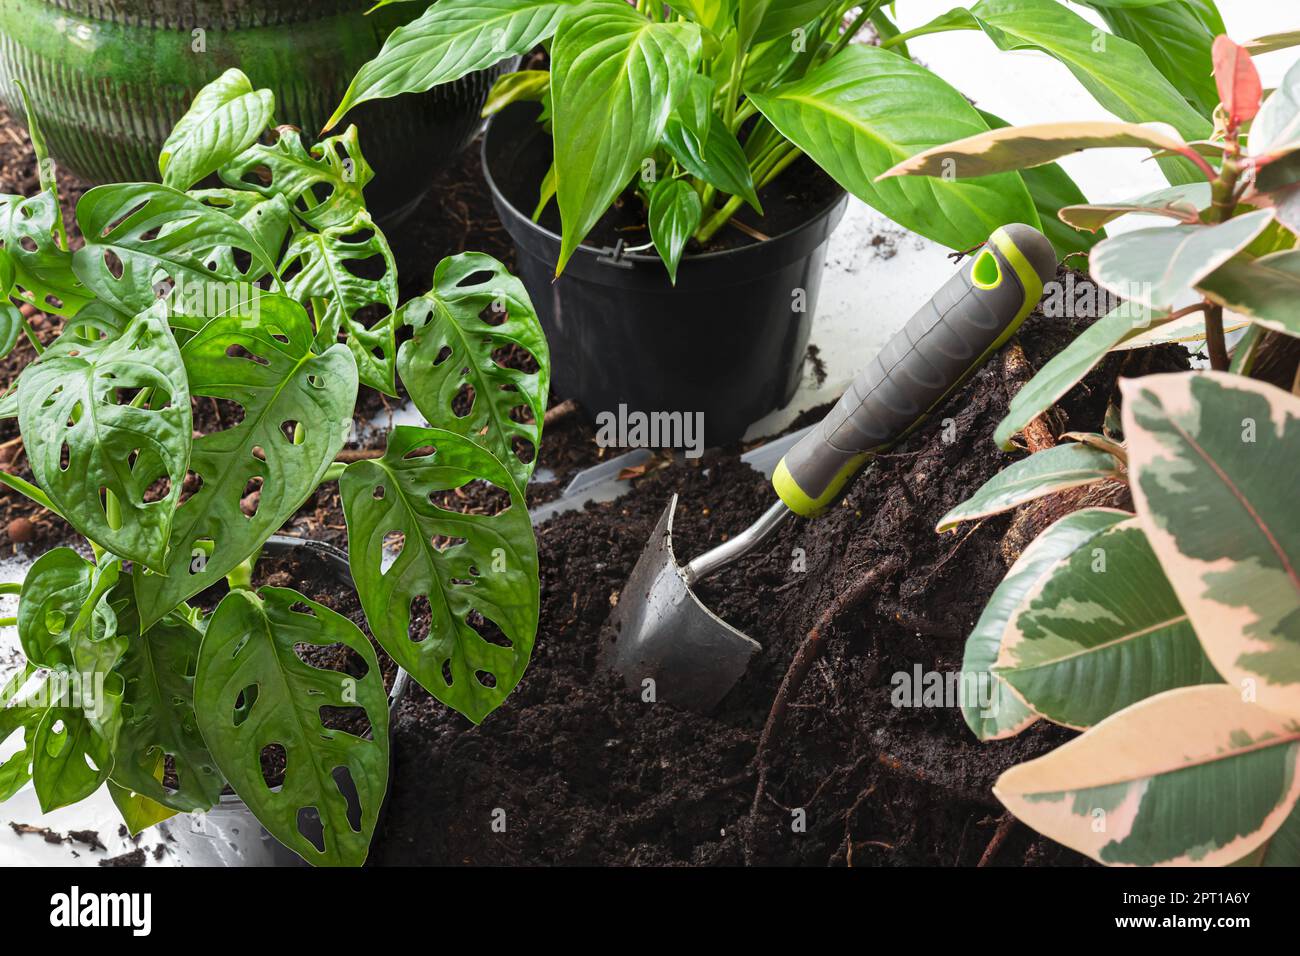 Spting transplanting of indoor plants - spathiphyllum or peace lily, ficus, monstera monkey, caring for plants and connecting with nature concept Stock Photo